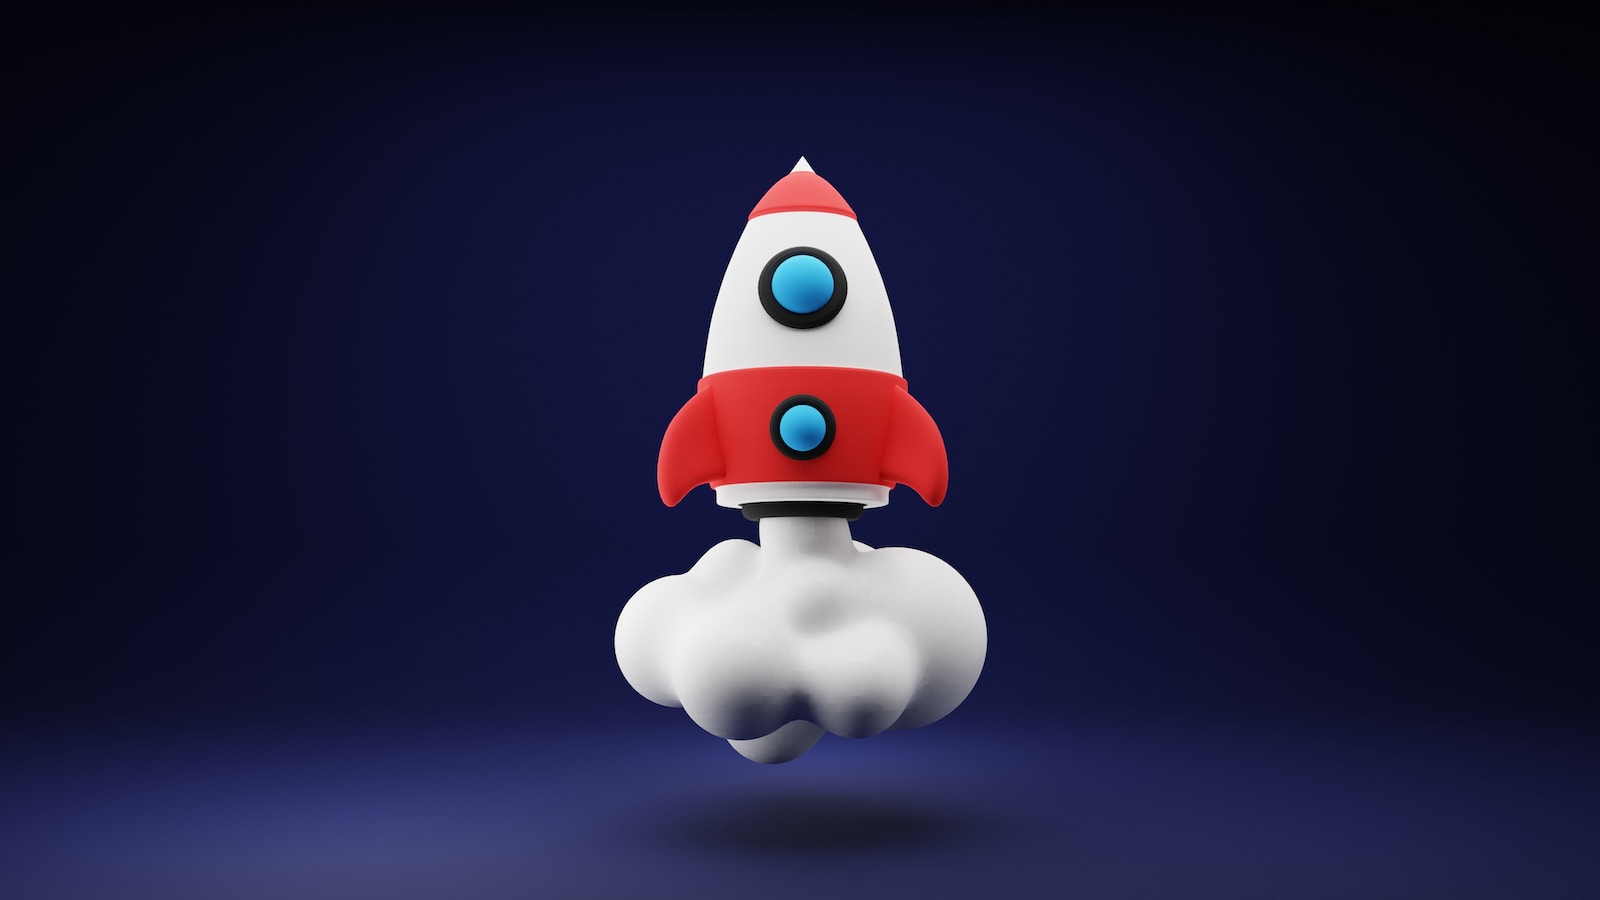 a red and white toy rocket on a blue background